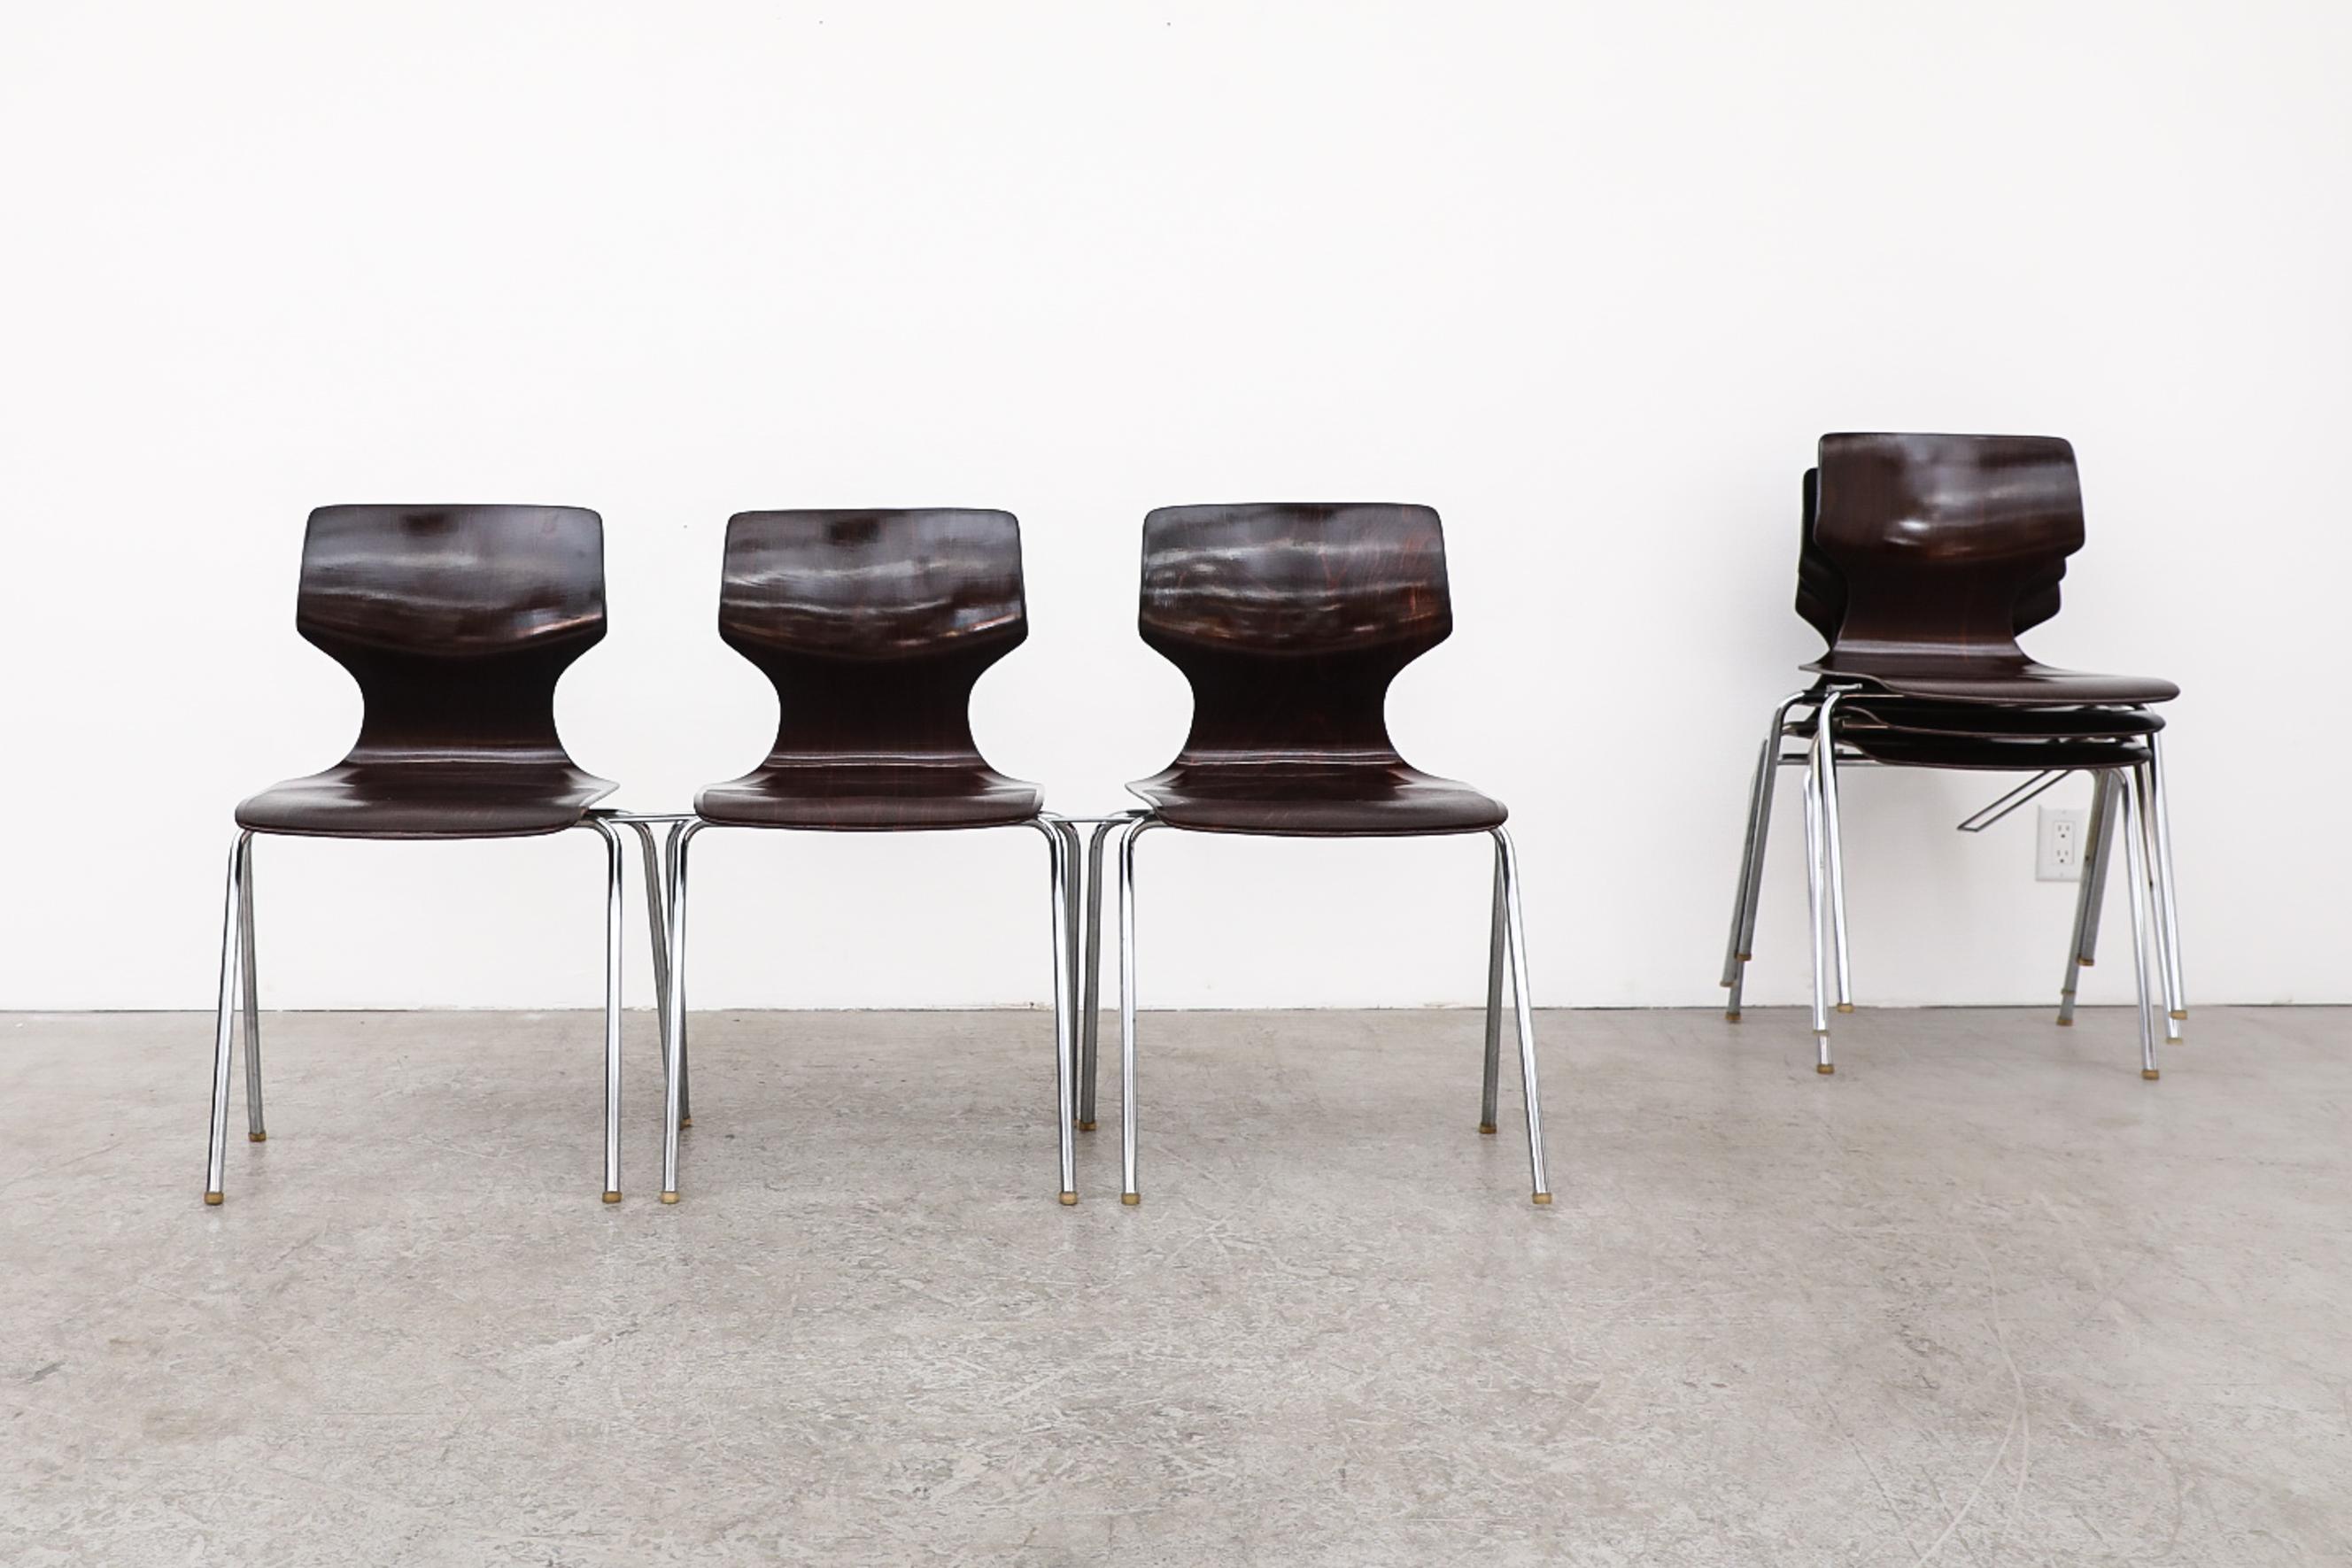 German Pagholz Flötotto Dark Brown Wingback Stacking Chairs with Chrome Legs, 1970s For Sale